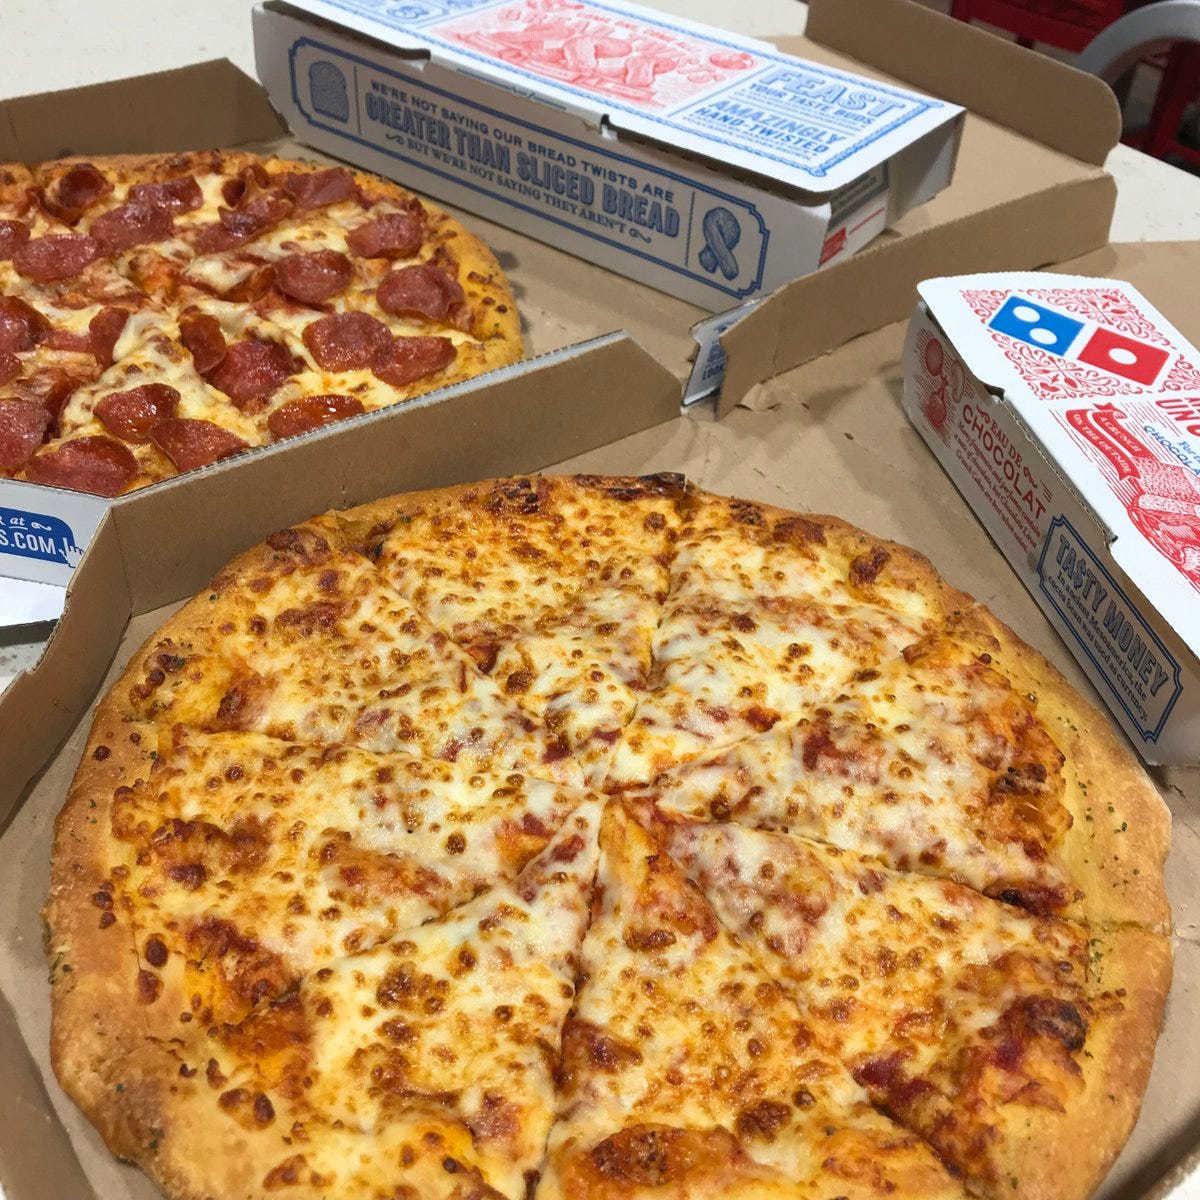 Domino's Pizza on Twitter: "Math makes us hungry...good thing pizzas are  buy 1 get 1 FREE this week when you order online. Carryout only. #PiDay  #BOGO… https://t.co/lOMNP6upcm"